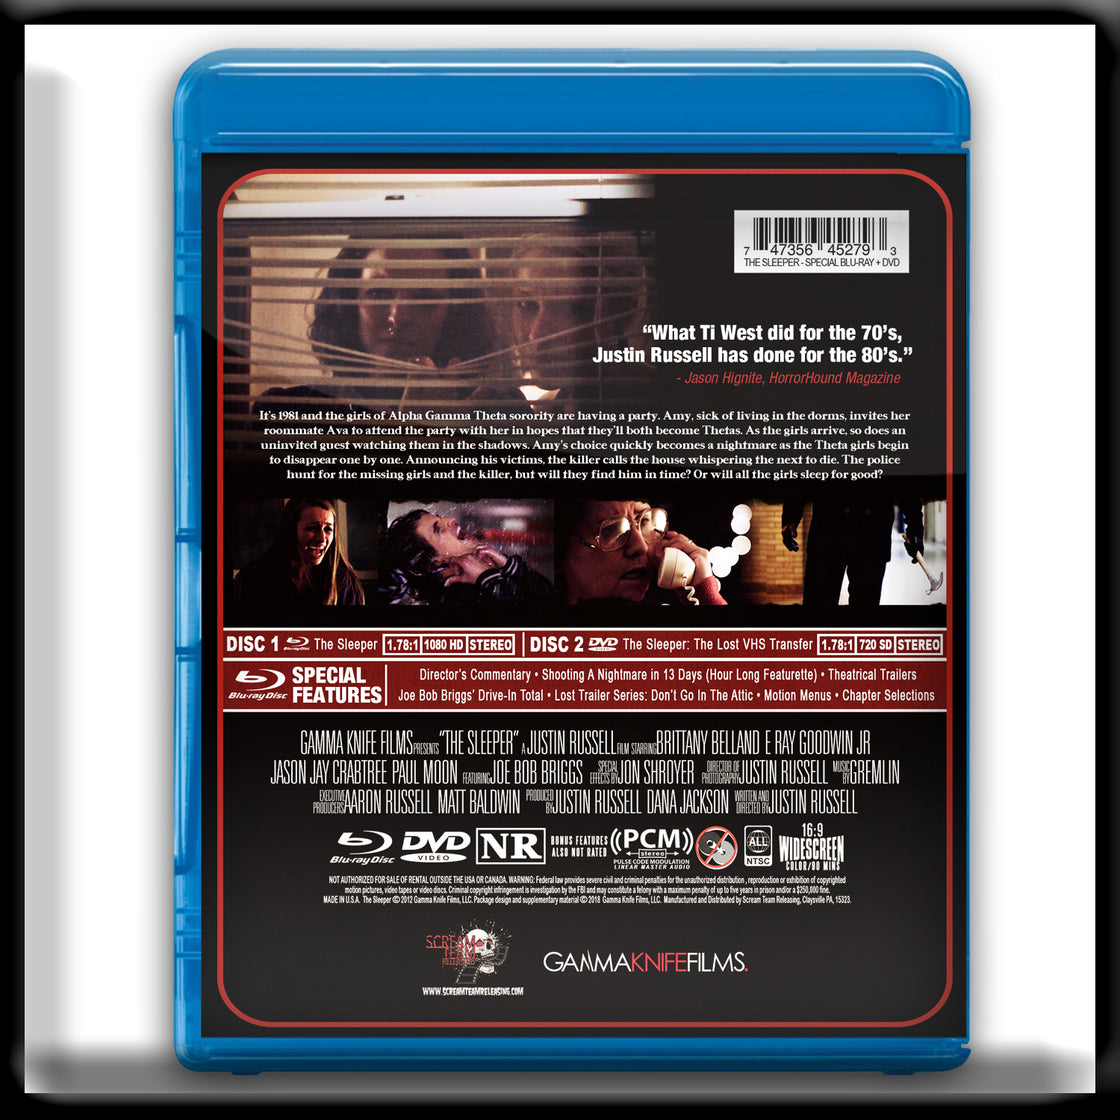 The Sleeper - Special Collectors Edition Blu-ray + DVD Combo Pack